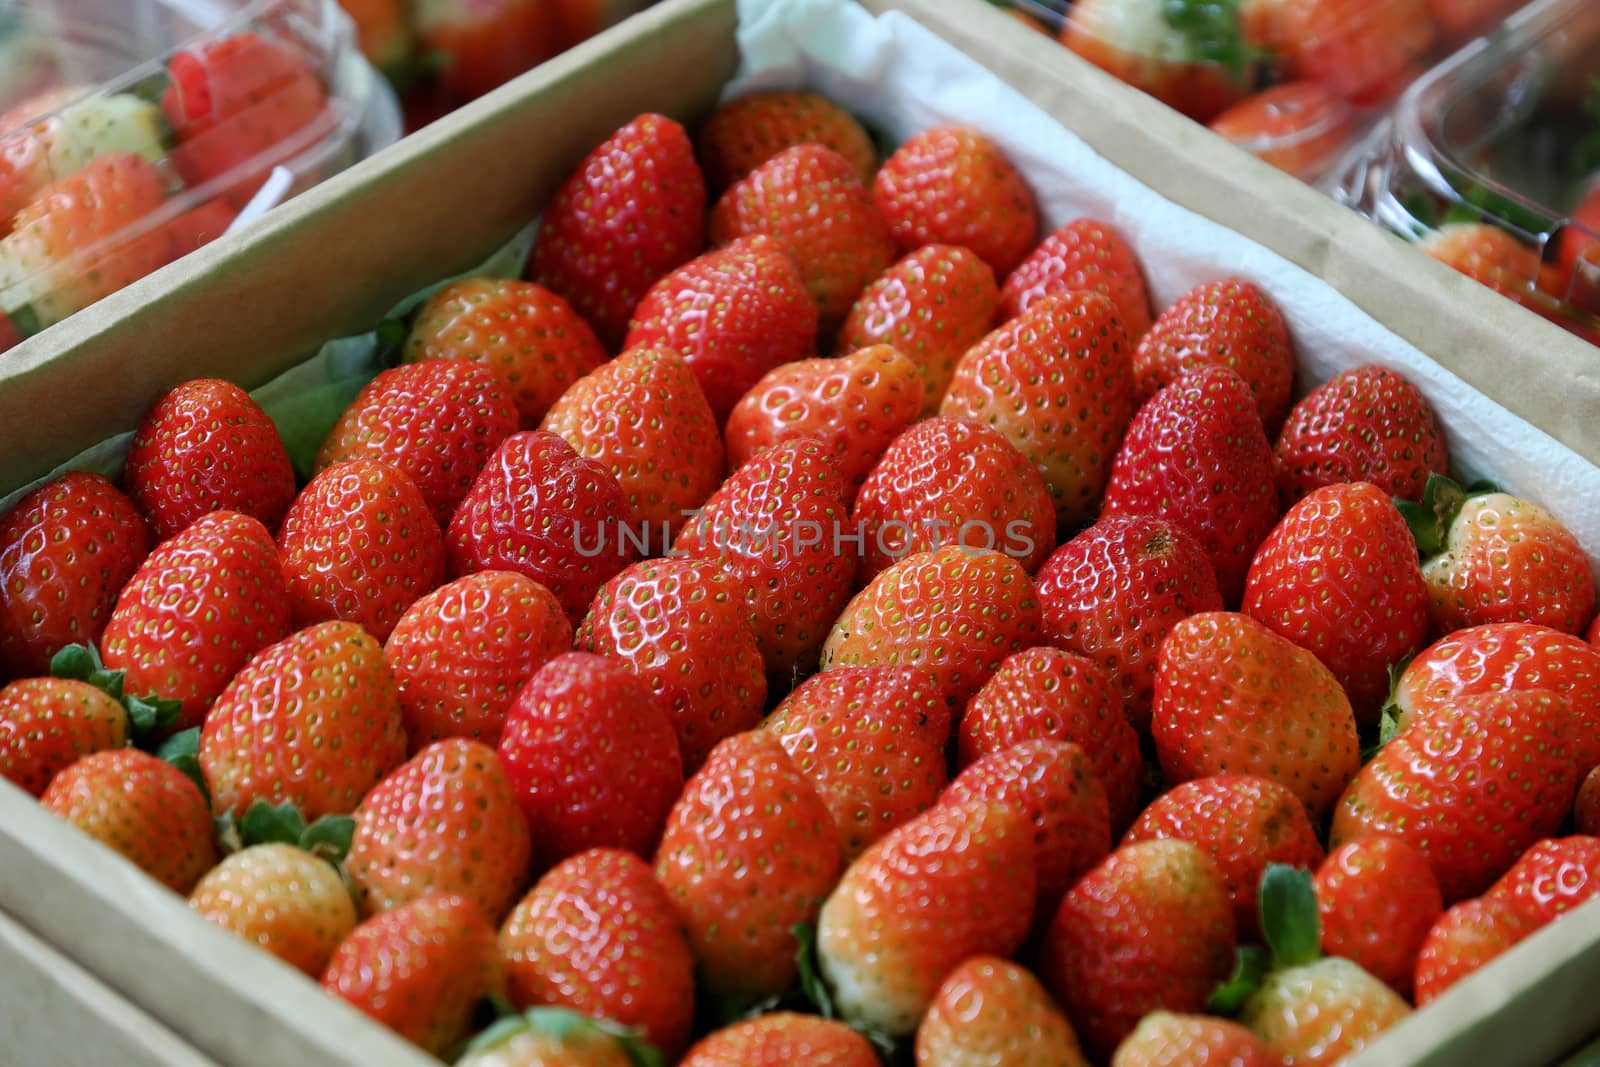 Basket of ripe red strawberry at Vietnam marketplace, fresh fruit, organic agriculture product, good for health, rich vitamin c